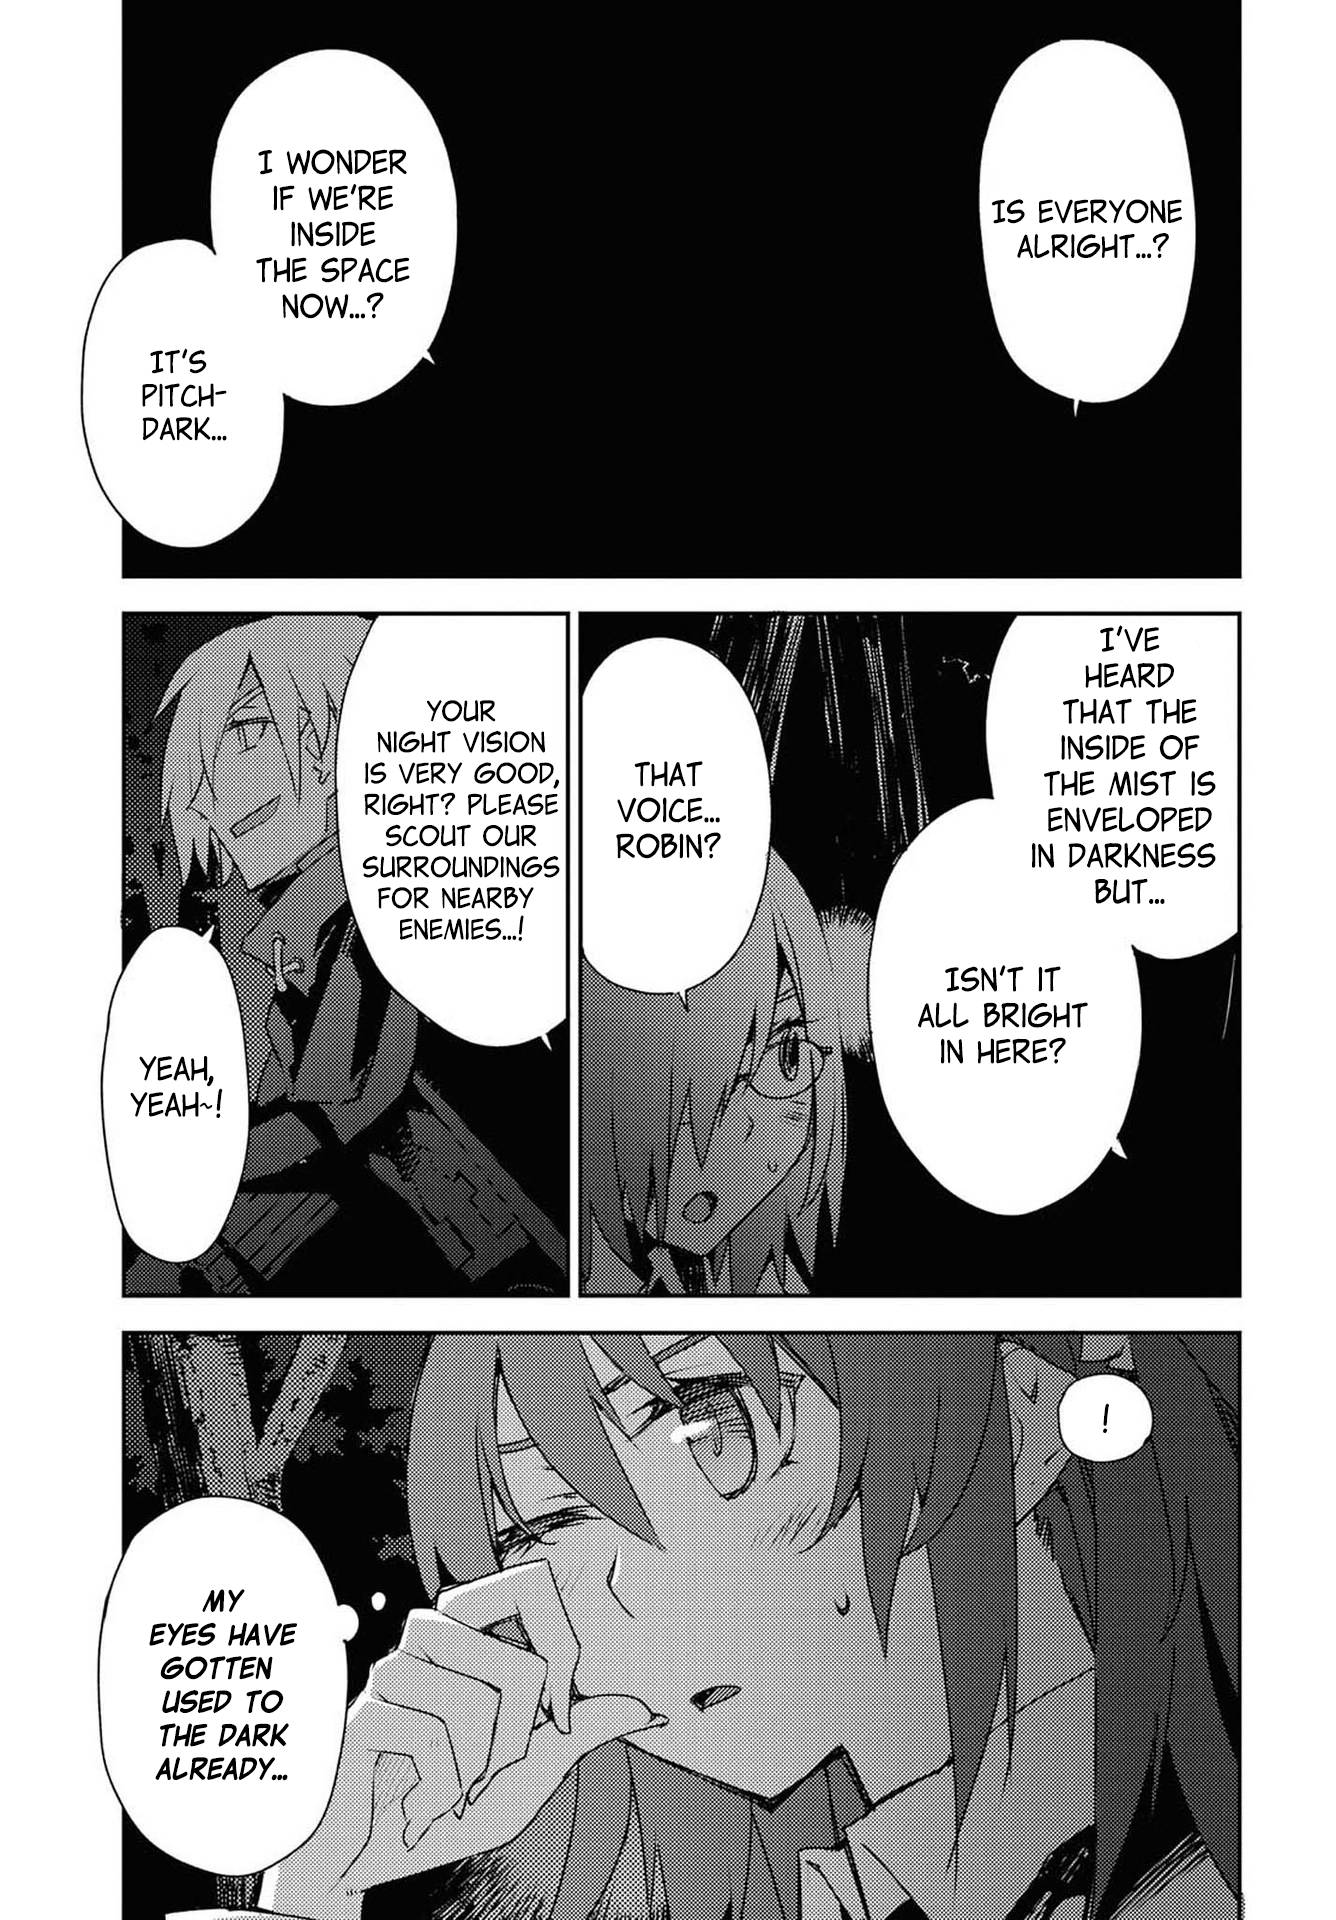 Fate/Grand Order: Epic of Remnant - Subspecies Singularity IV: Taboo Advent Salem: Salem of Heresy - chapter 2 - #3